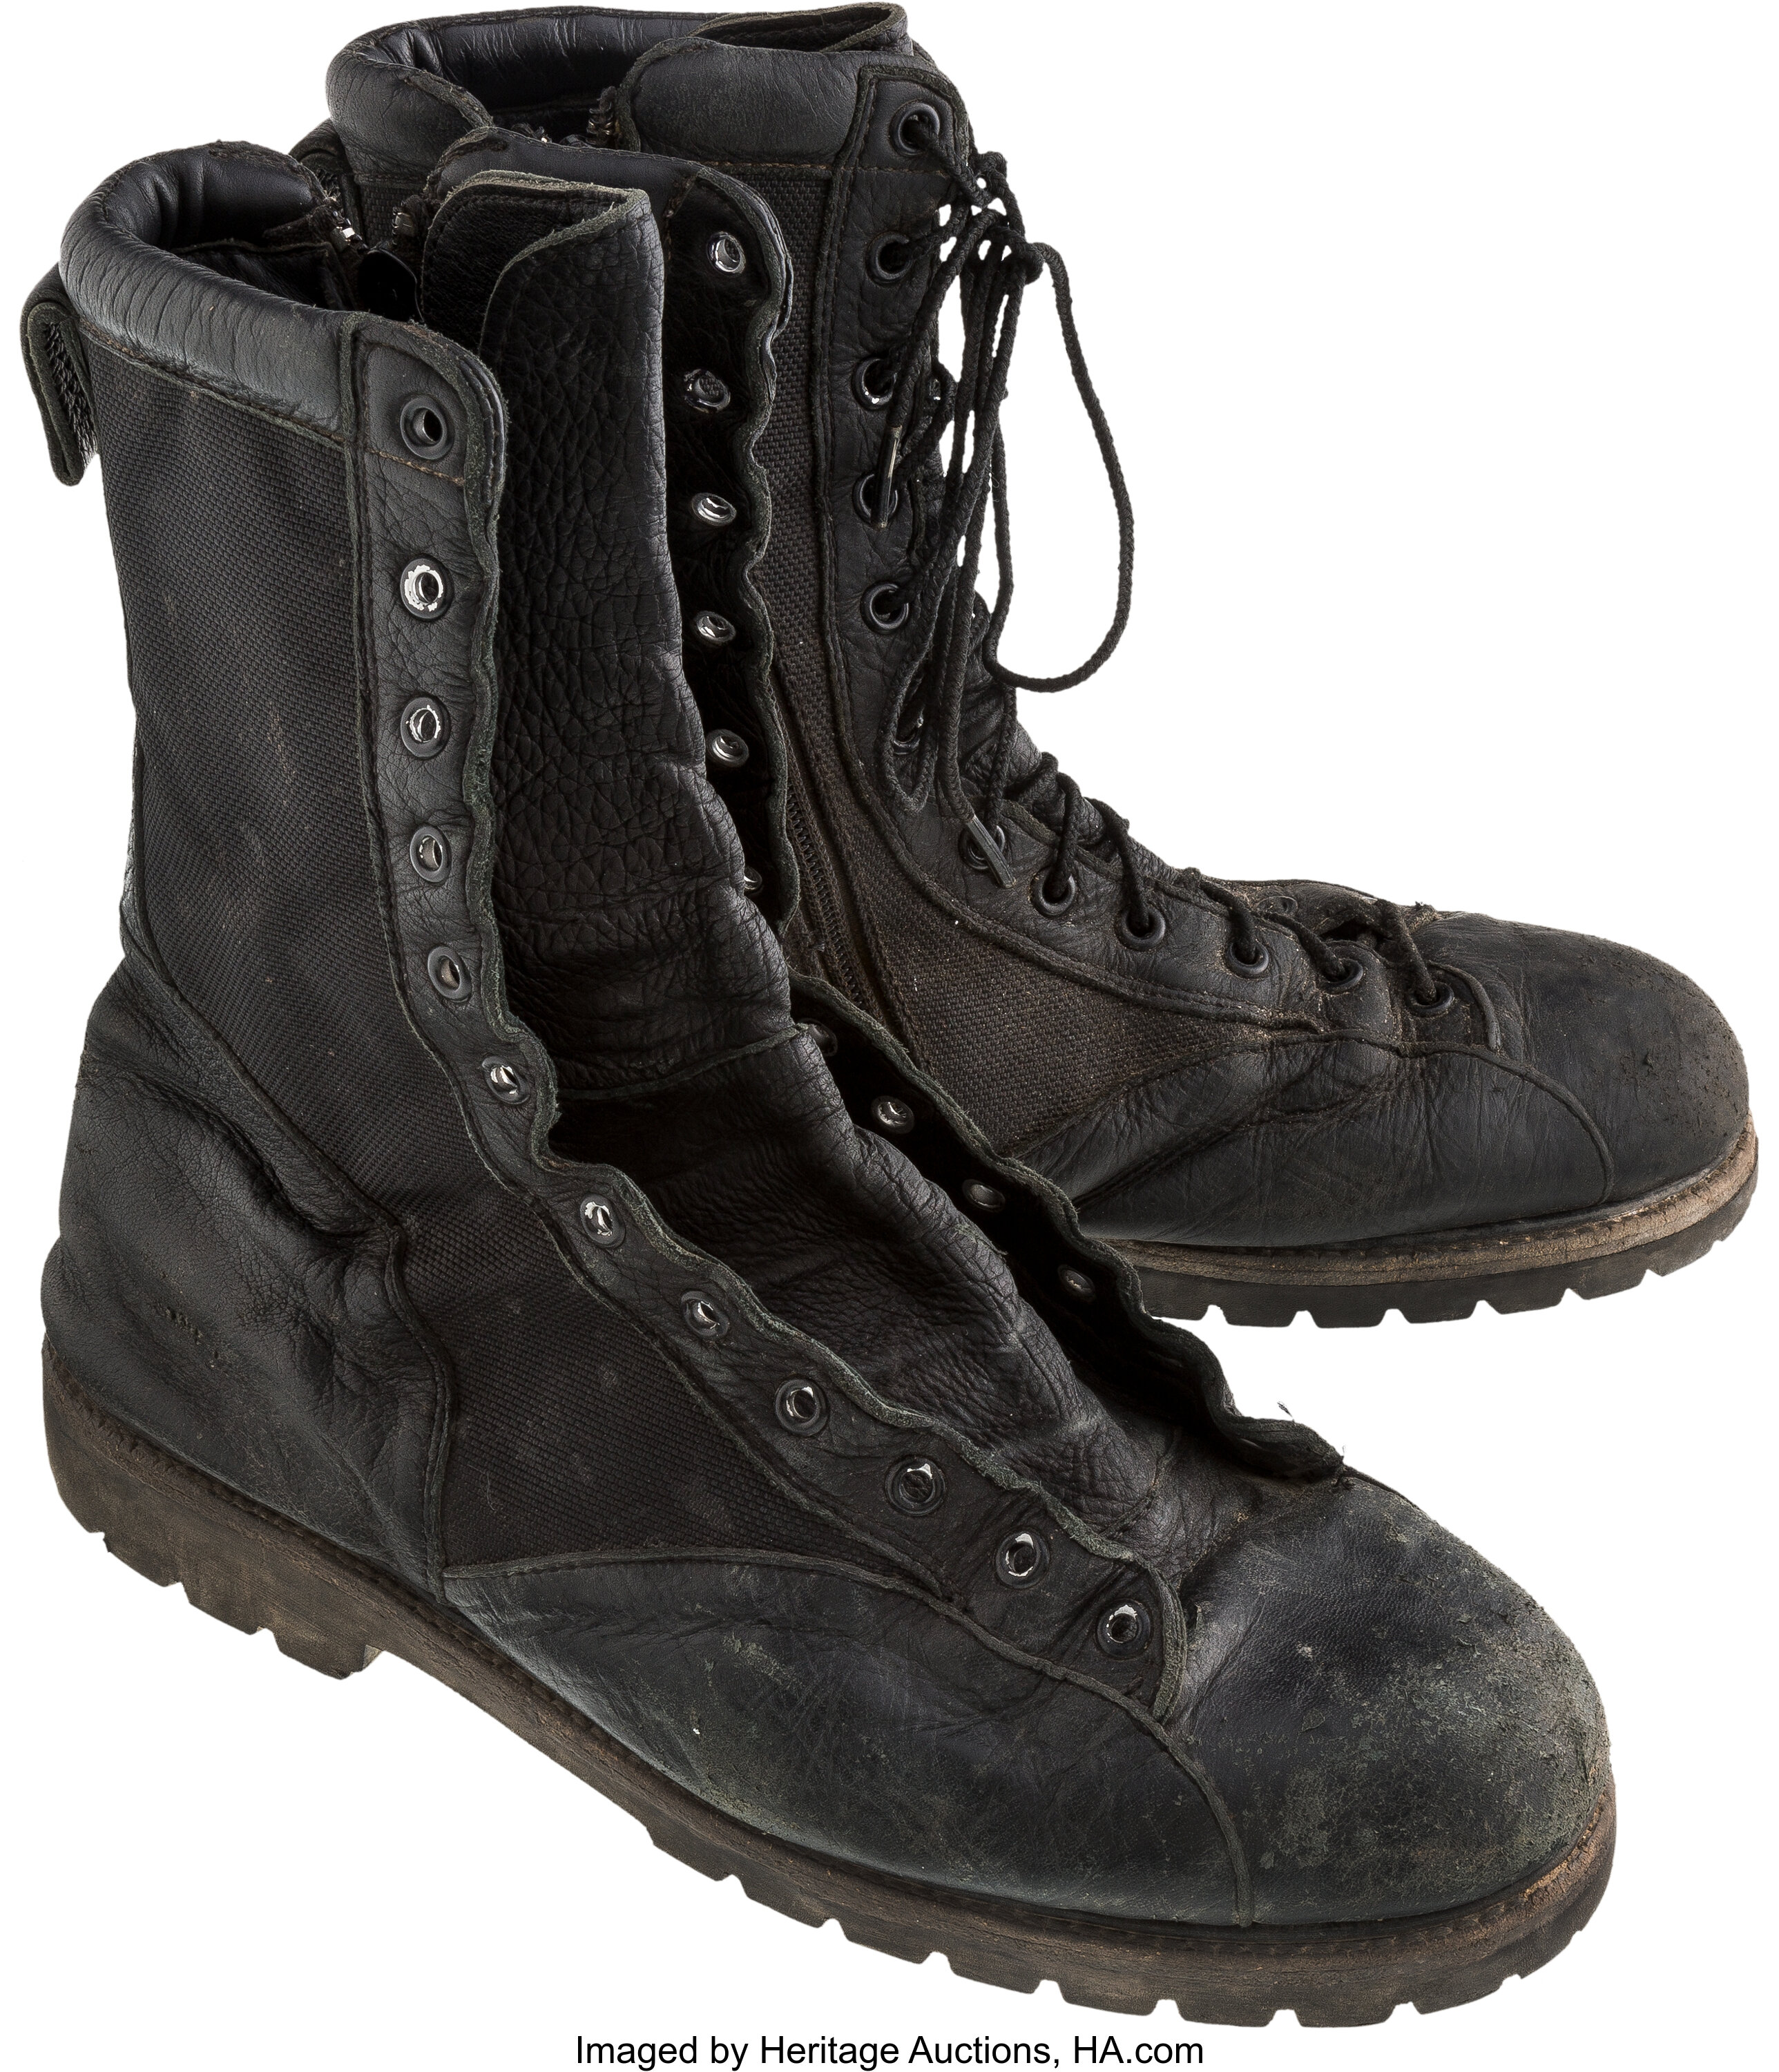 A Pair of Combat Boots from 